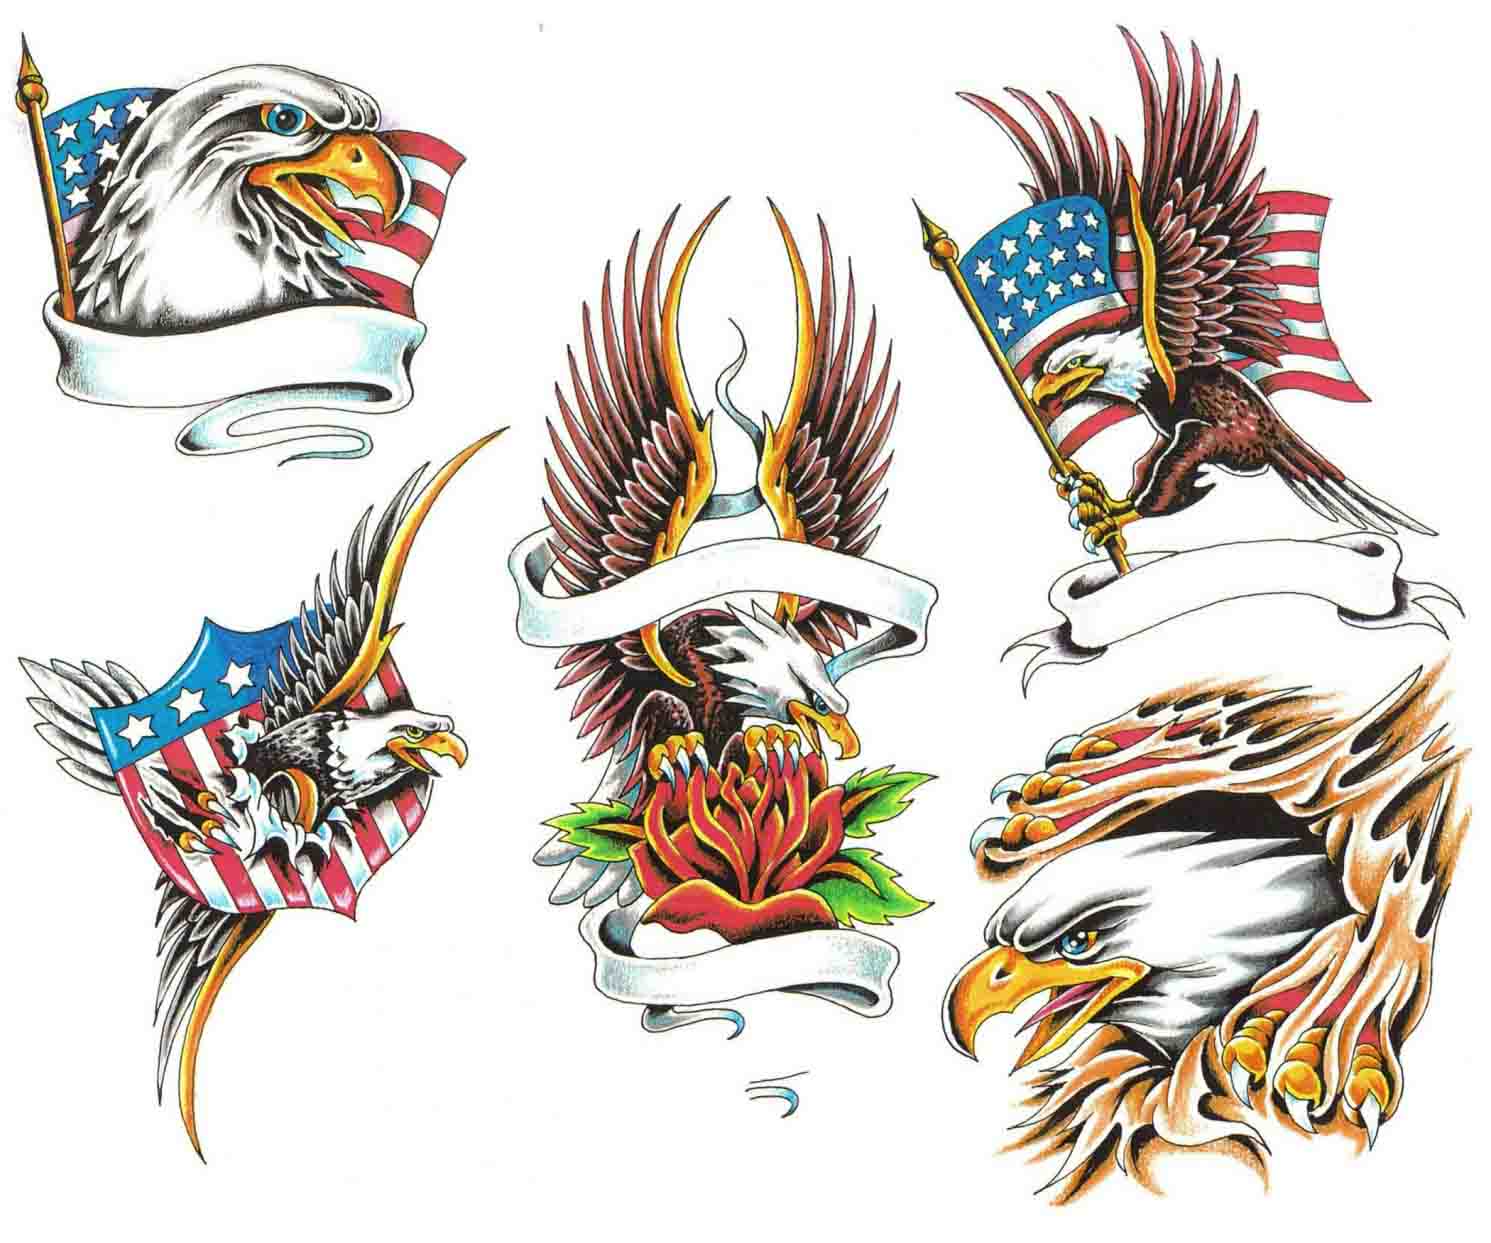 Attraction of Eagle Tattoos Designs | Best Tattoos Designs